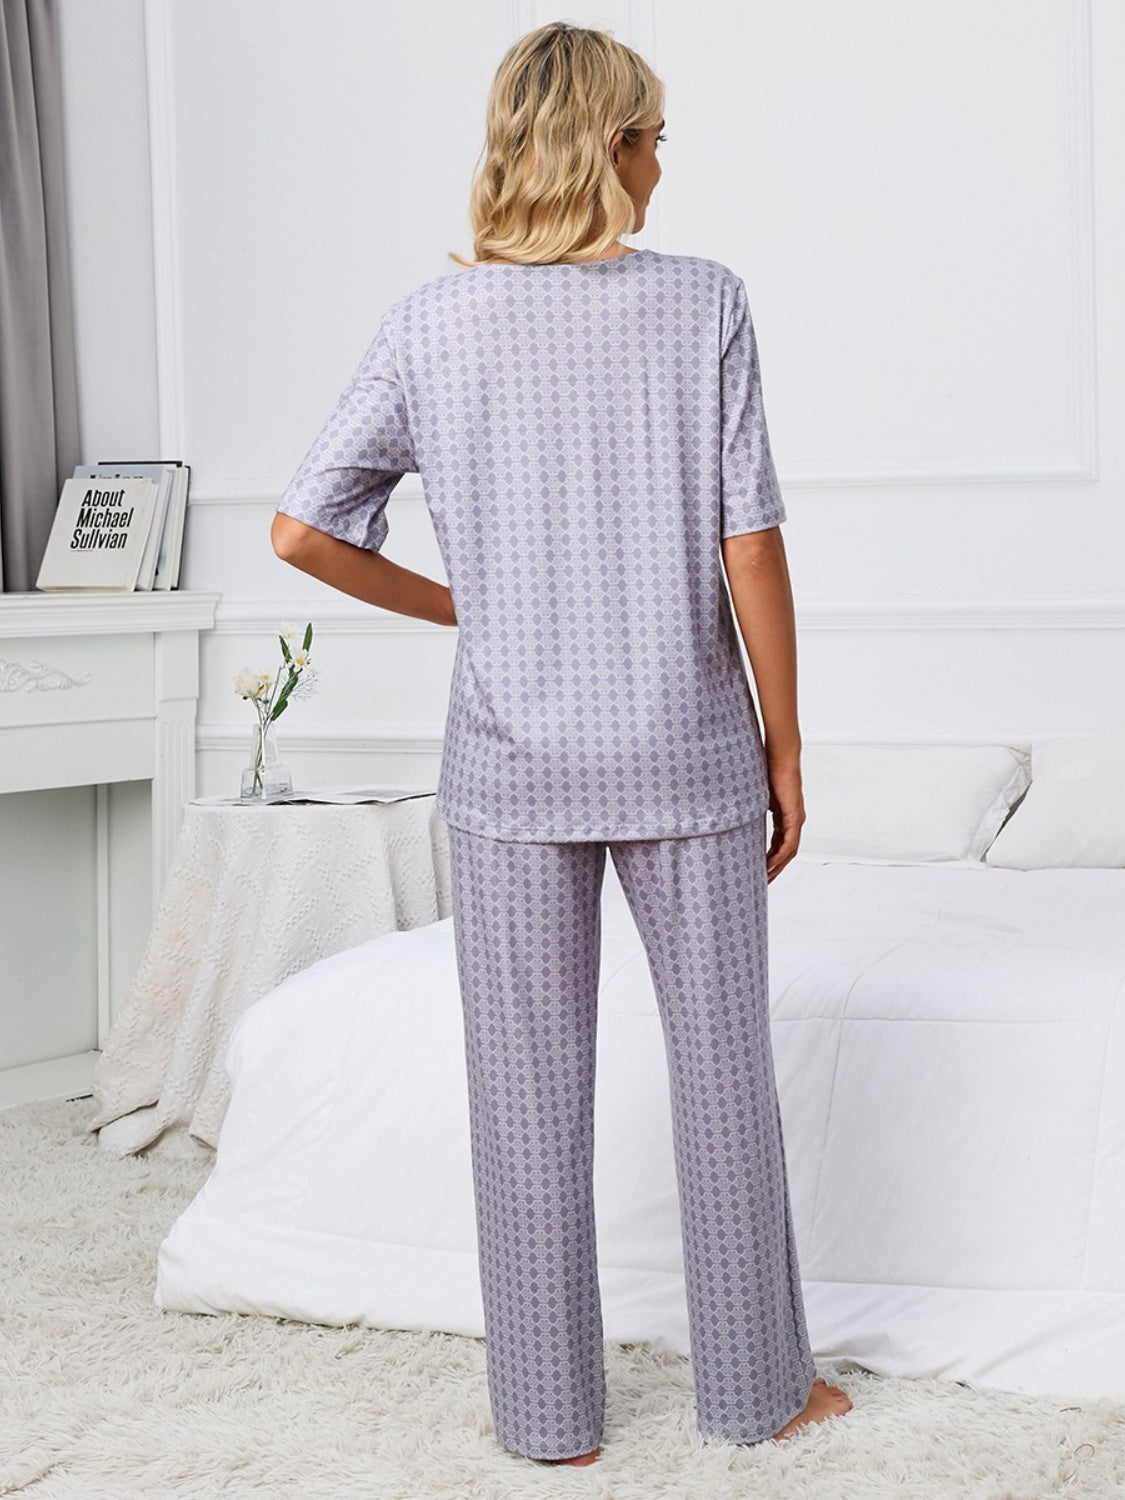 Indulge in luxury with our V-Neck Lounge Set. Available in blue & pink, perfect for stylish comfort at home. Shop now for cozy elegance!